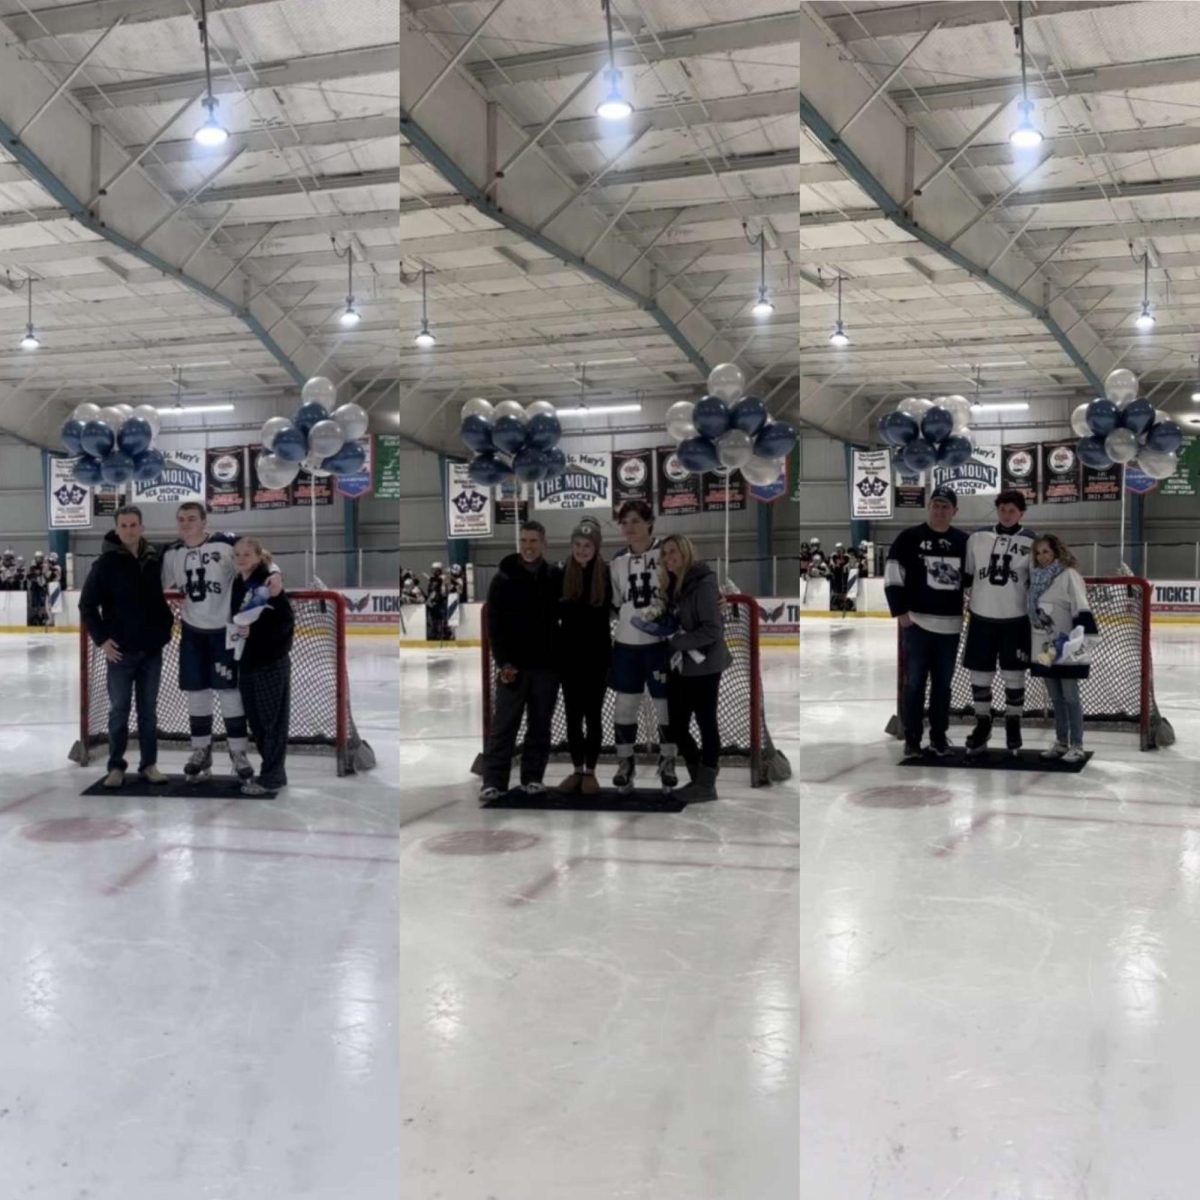 Seniors Seamus McGee, Brady Gardiner, and Max Dabruzzo pose
 as they share a sentimental moment with their families on the ice 
before game time. 

